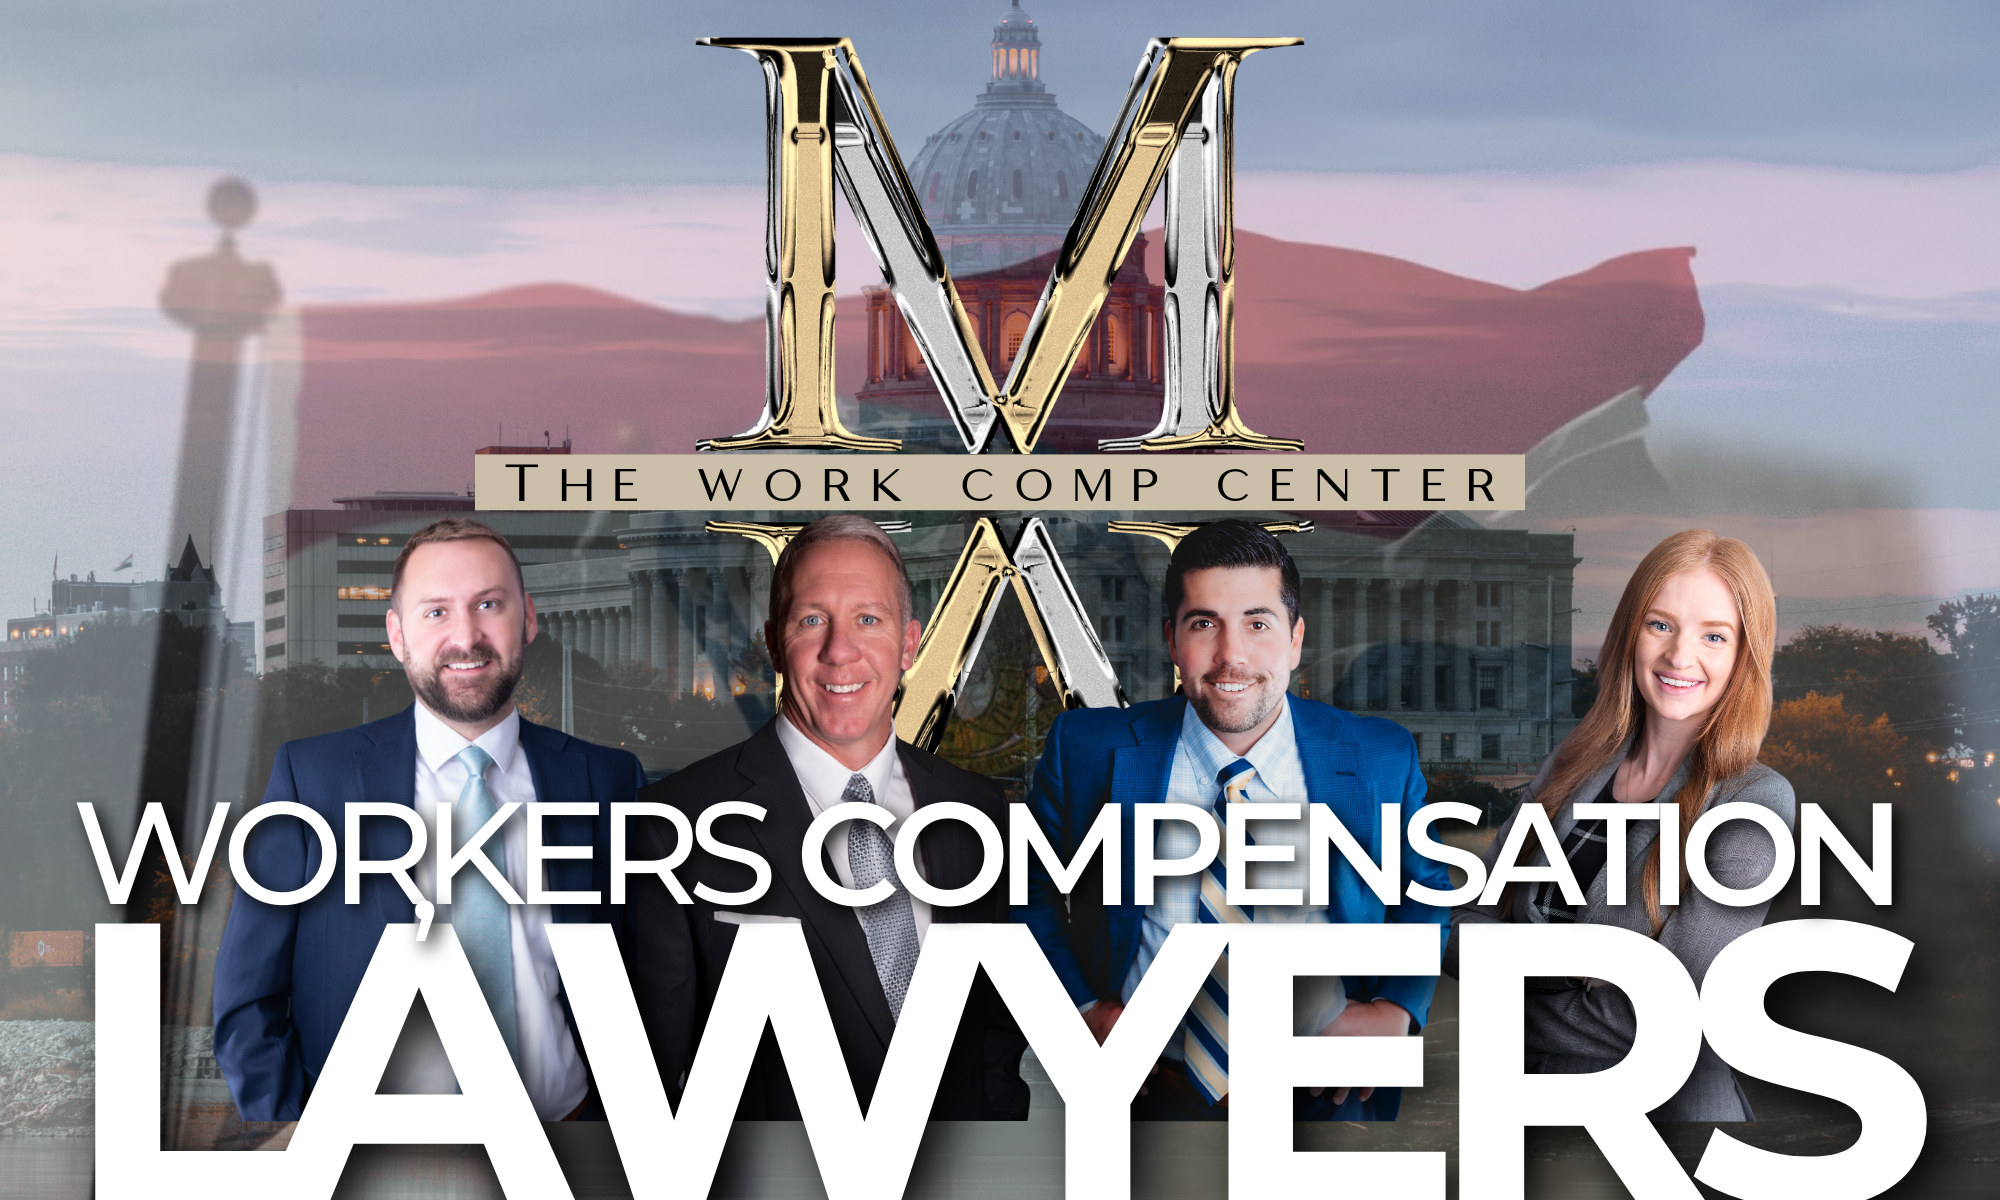 The Work Comp Center: Missouri Workers' Compensation Lawyers